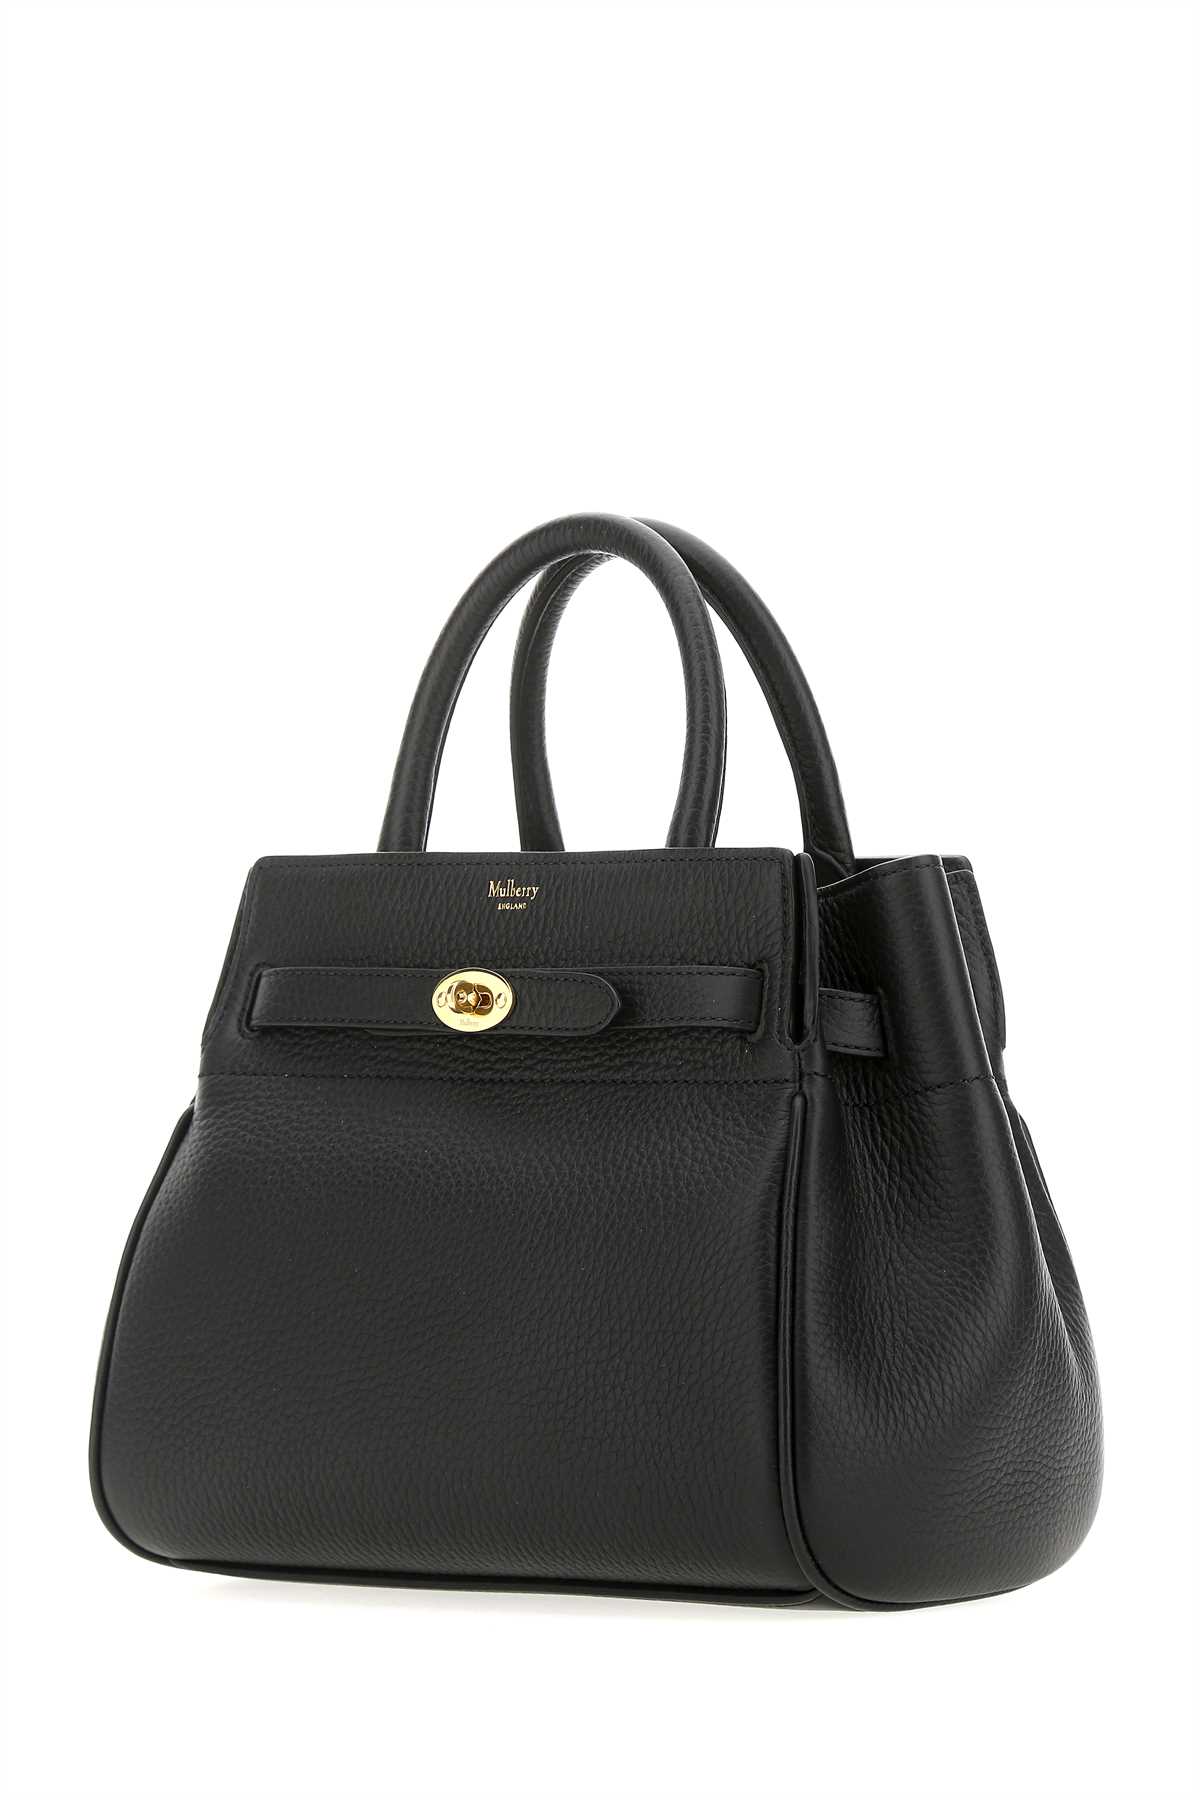 Mulberry Black Leather Small Bayswater Handbag In A100